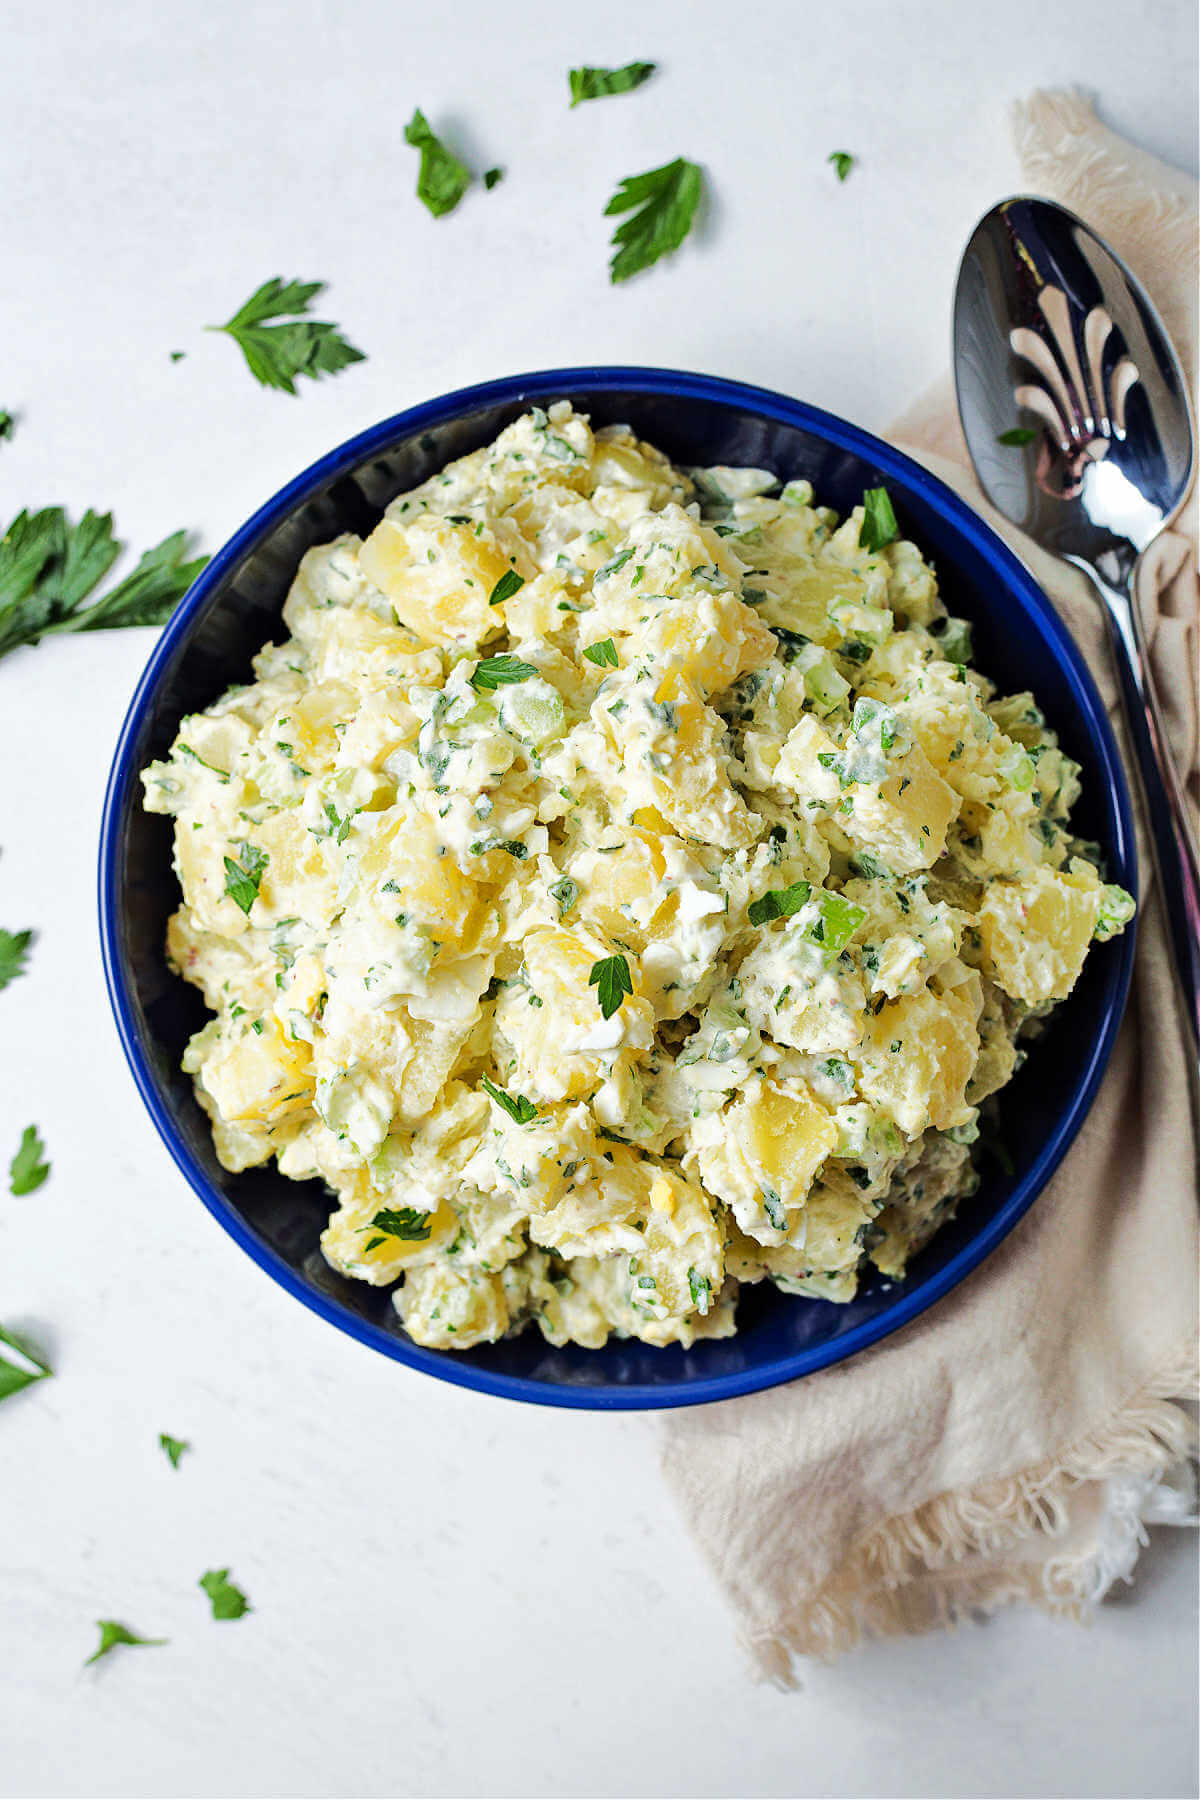 fresh herb potato salad in a blue bowl on a table with a linen napkin and a serving spoon.